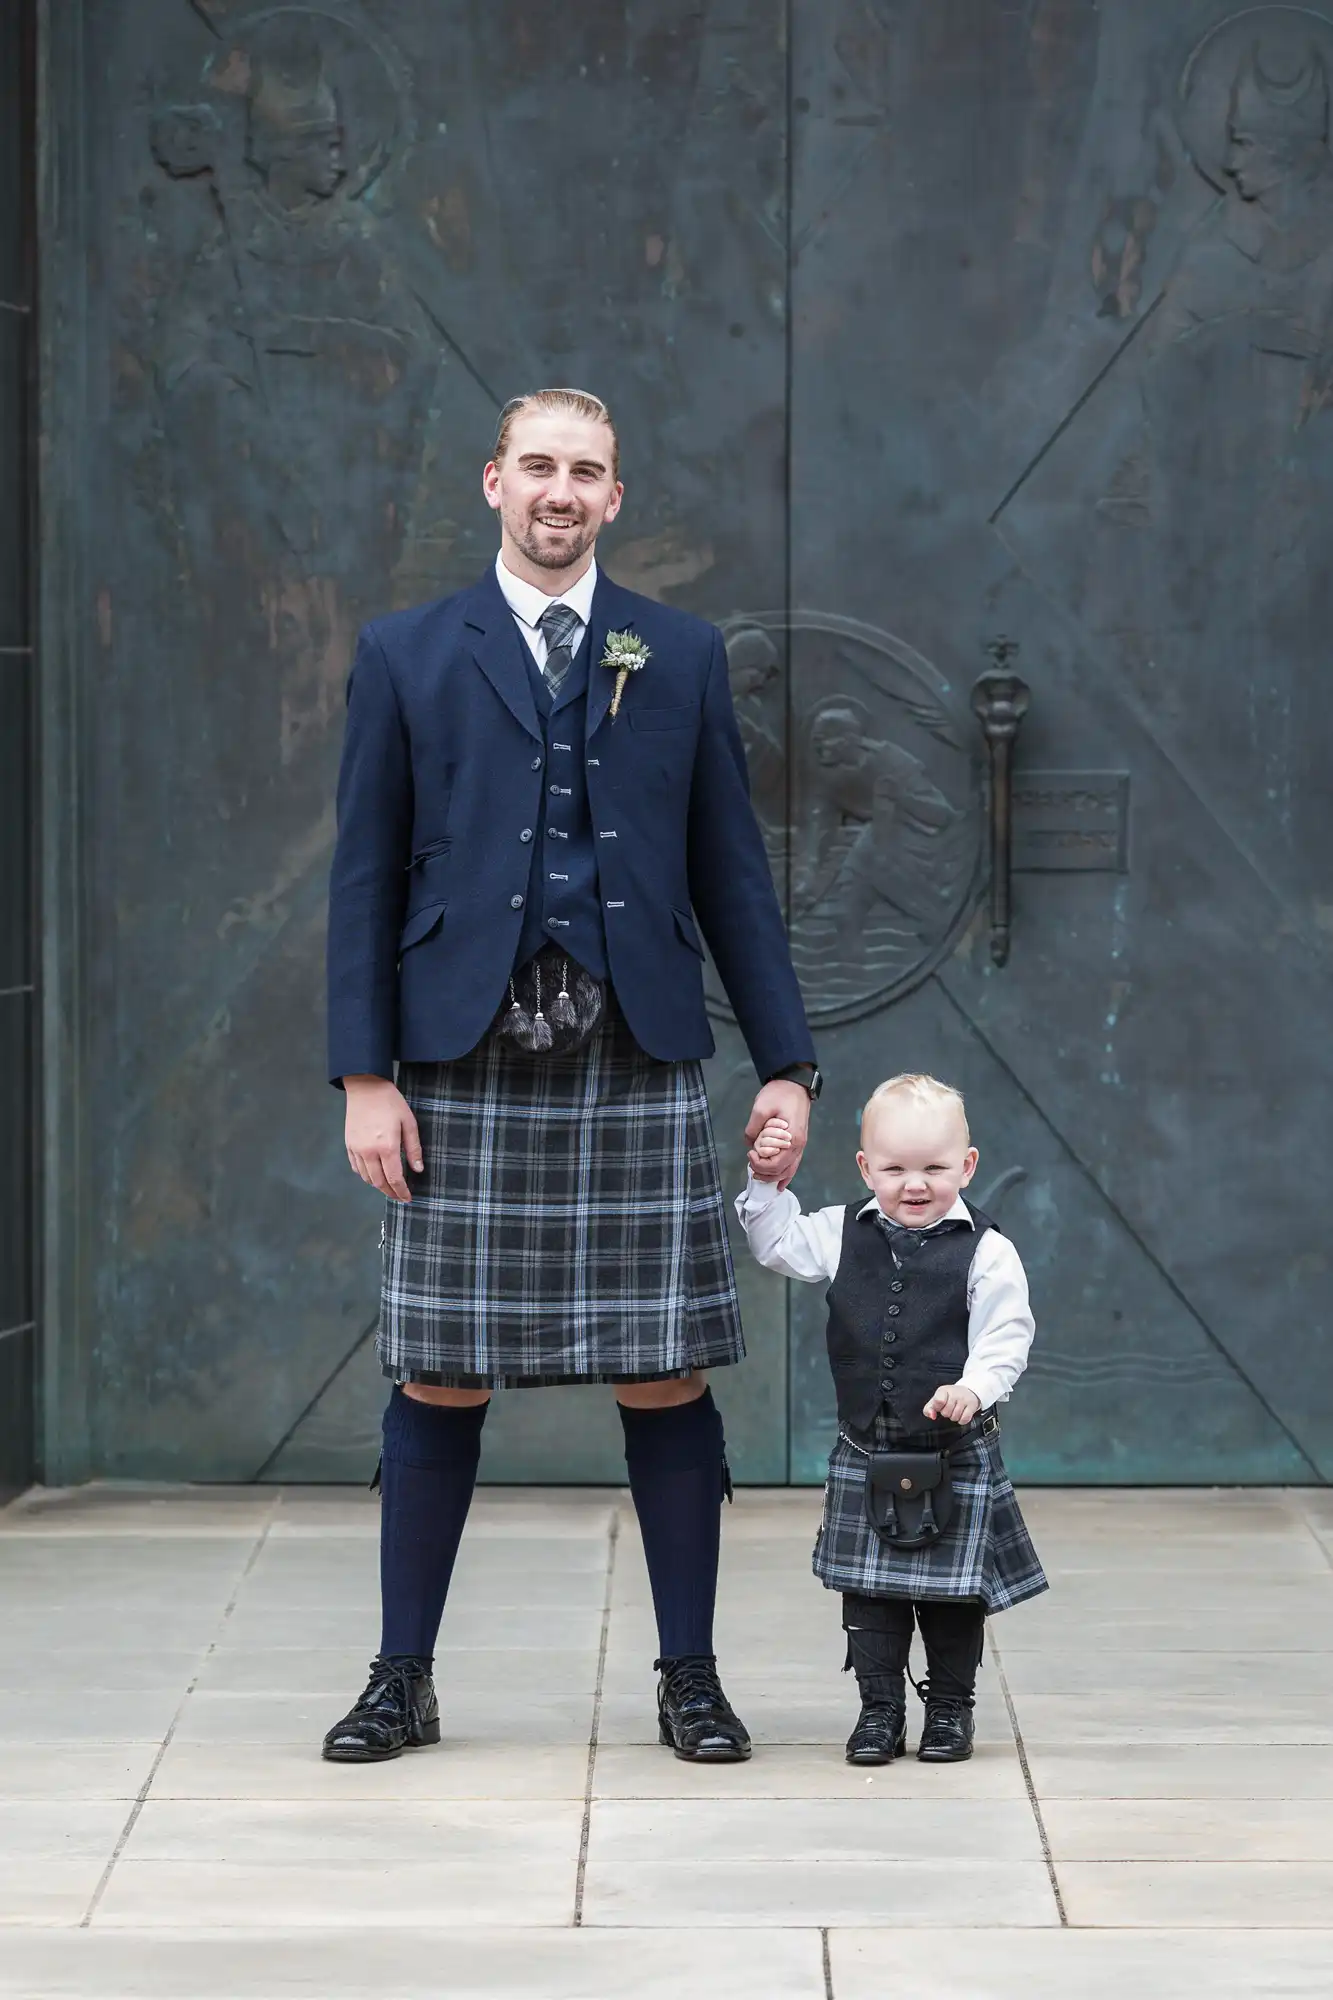 A man in a kilt and jacket stands smiling beside a young child in a matching kilt outfit, both posing in front of a relief sculpture wall.